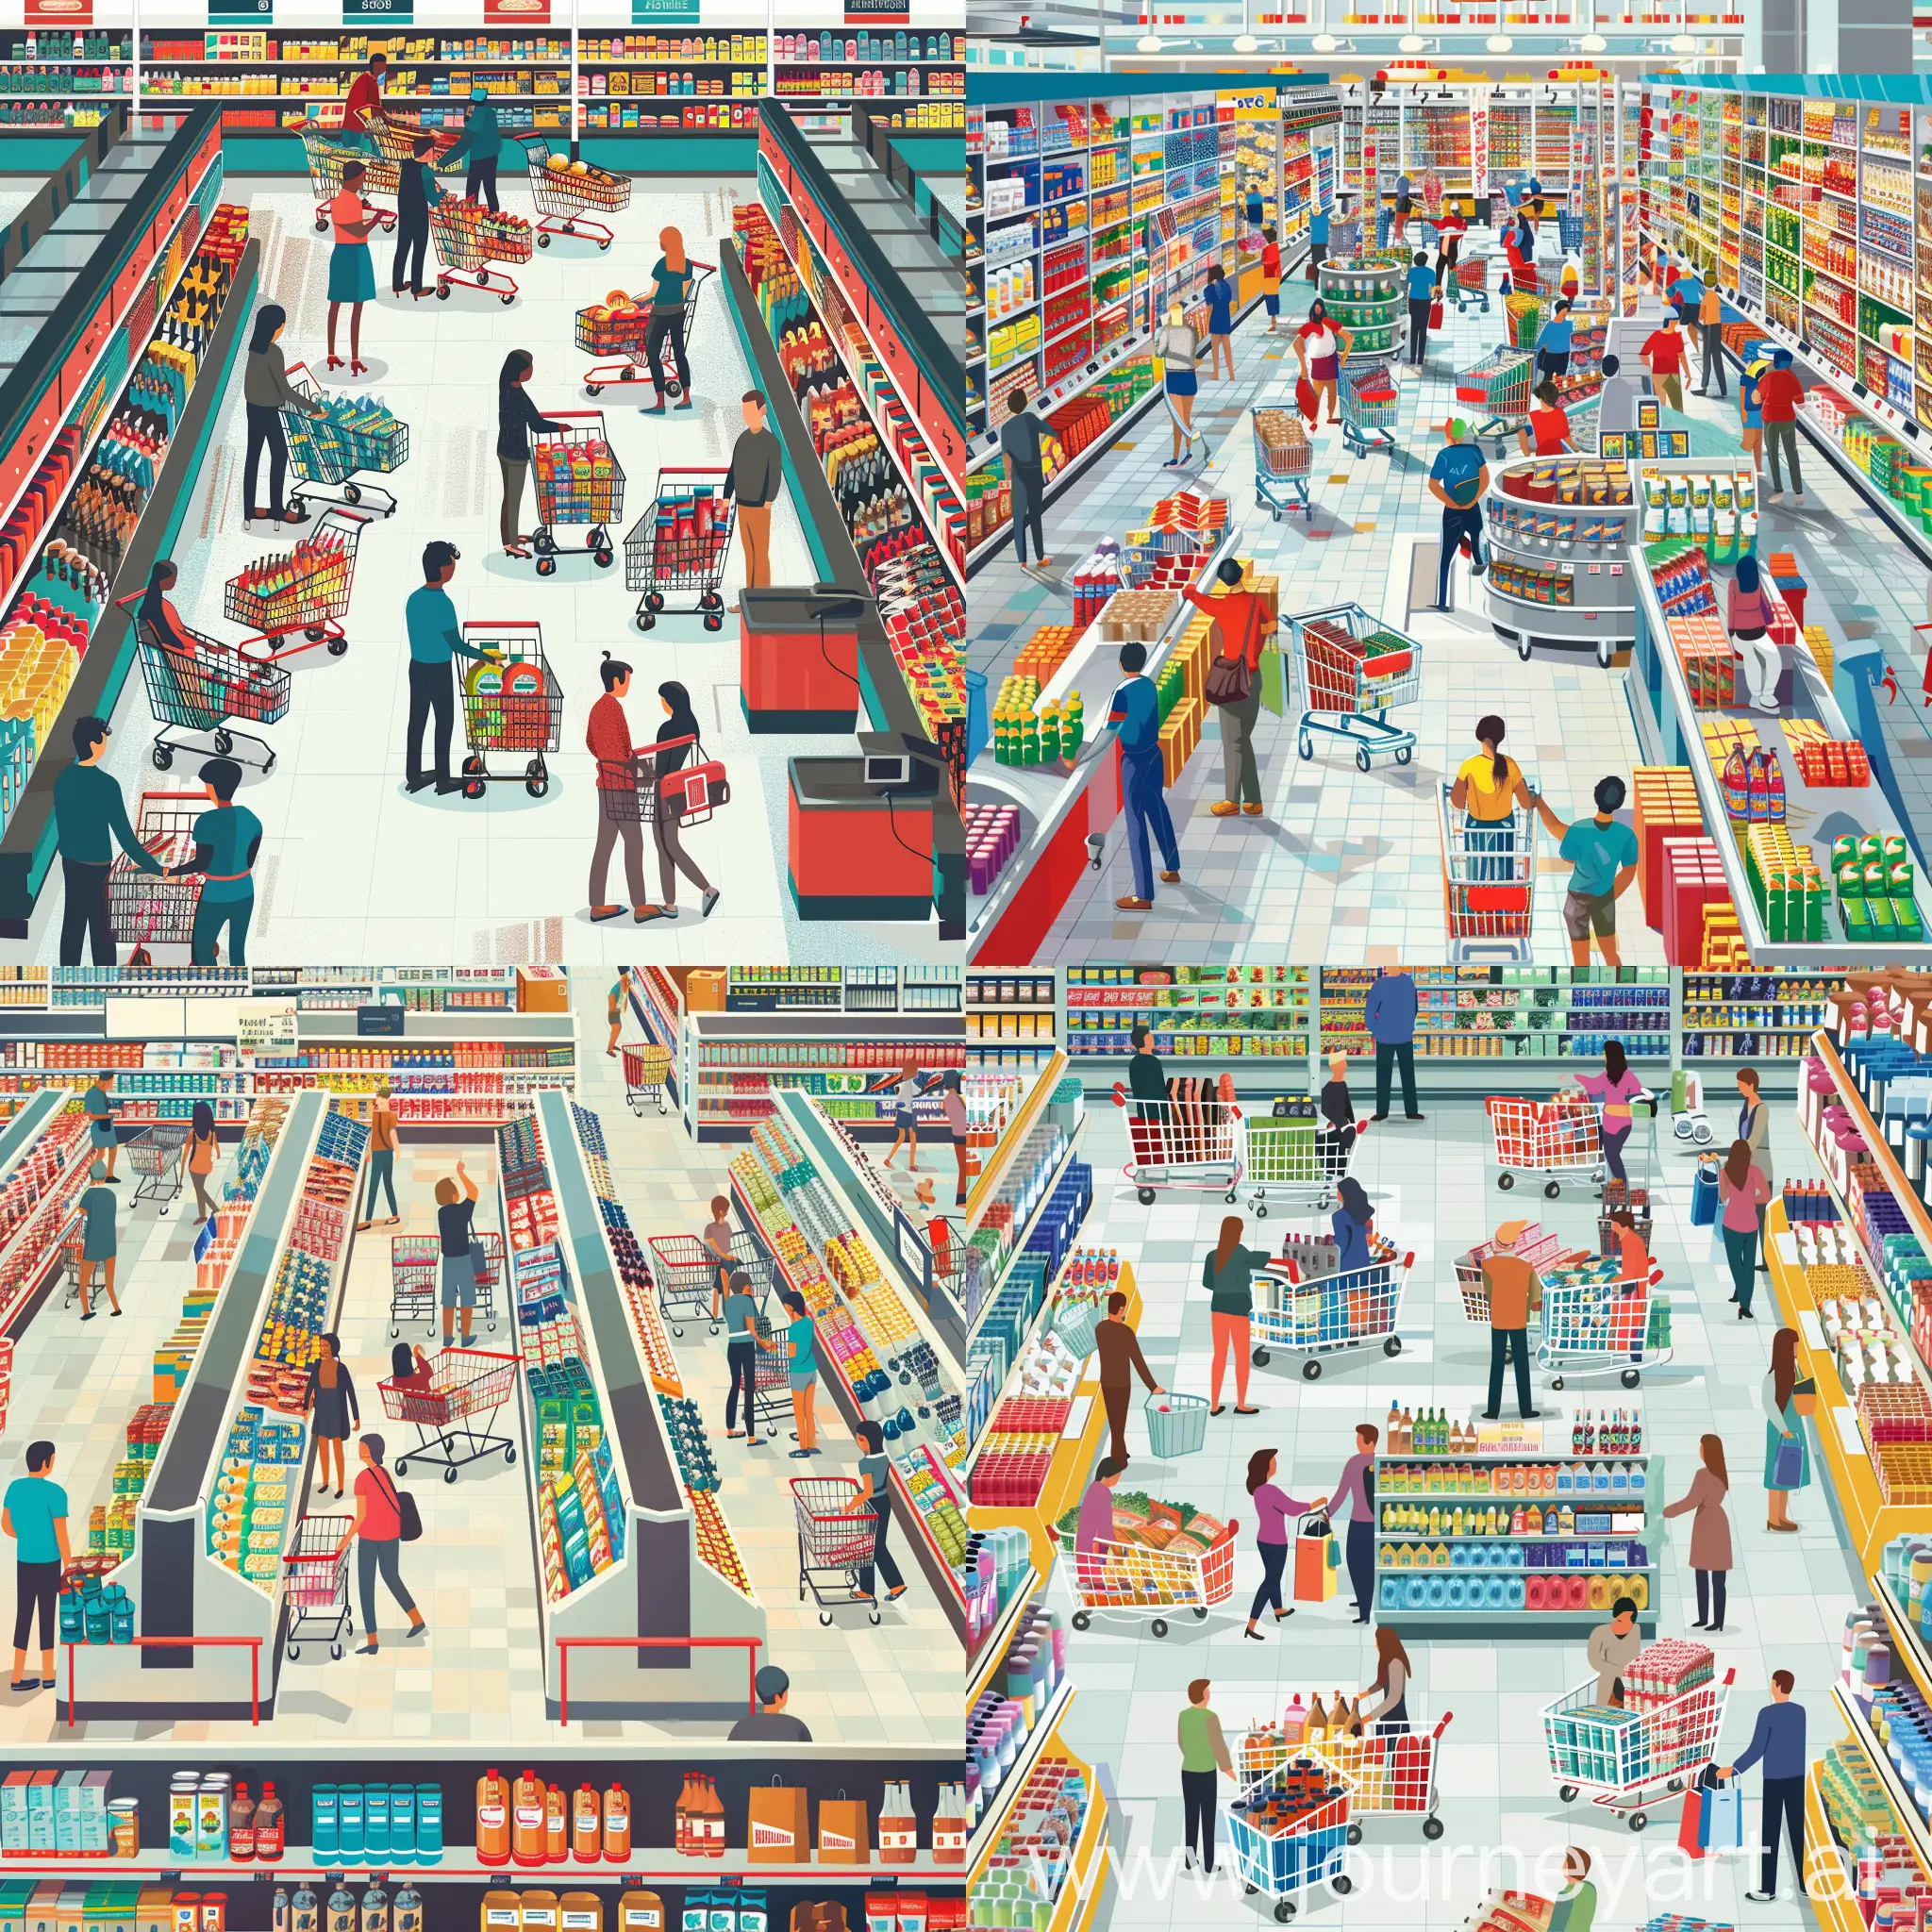 A bustling supermarket scene with aisles filled with colorful products, shopping carts being pushed around, and customers at the checkout counters.